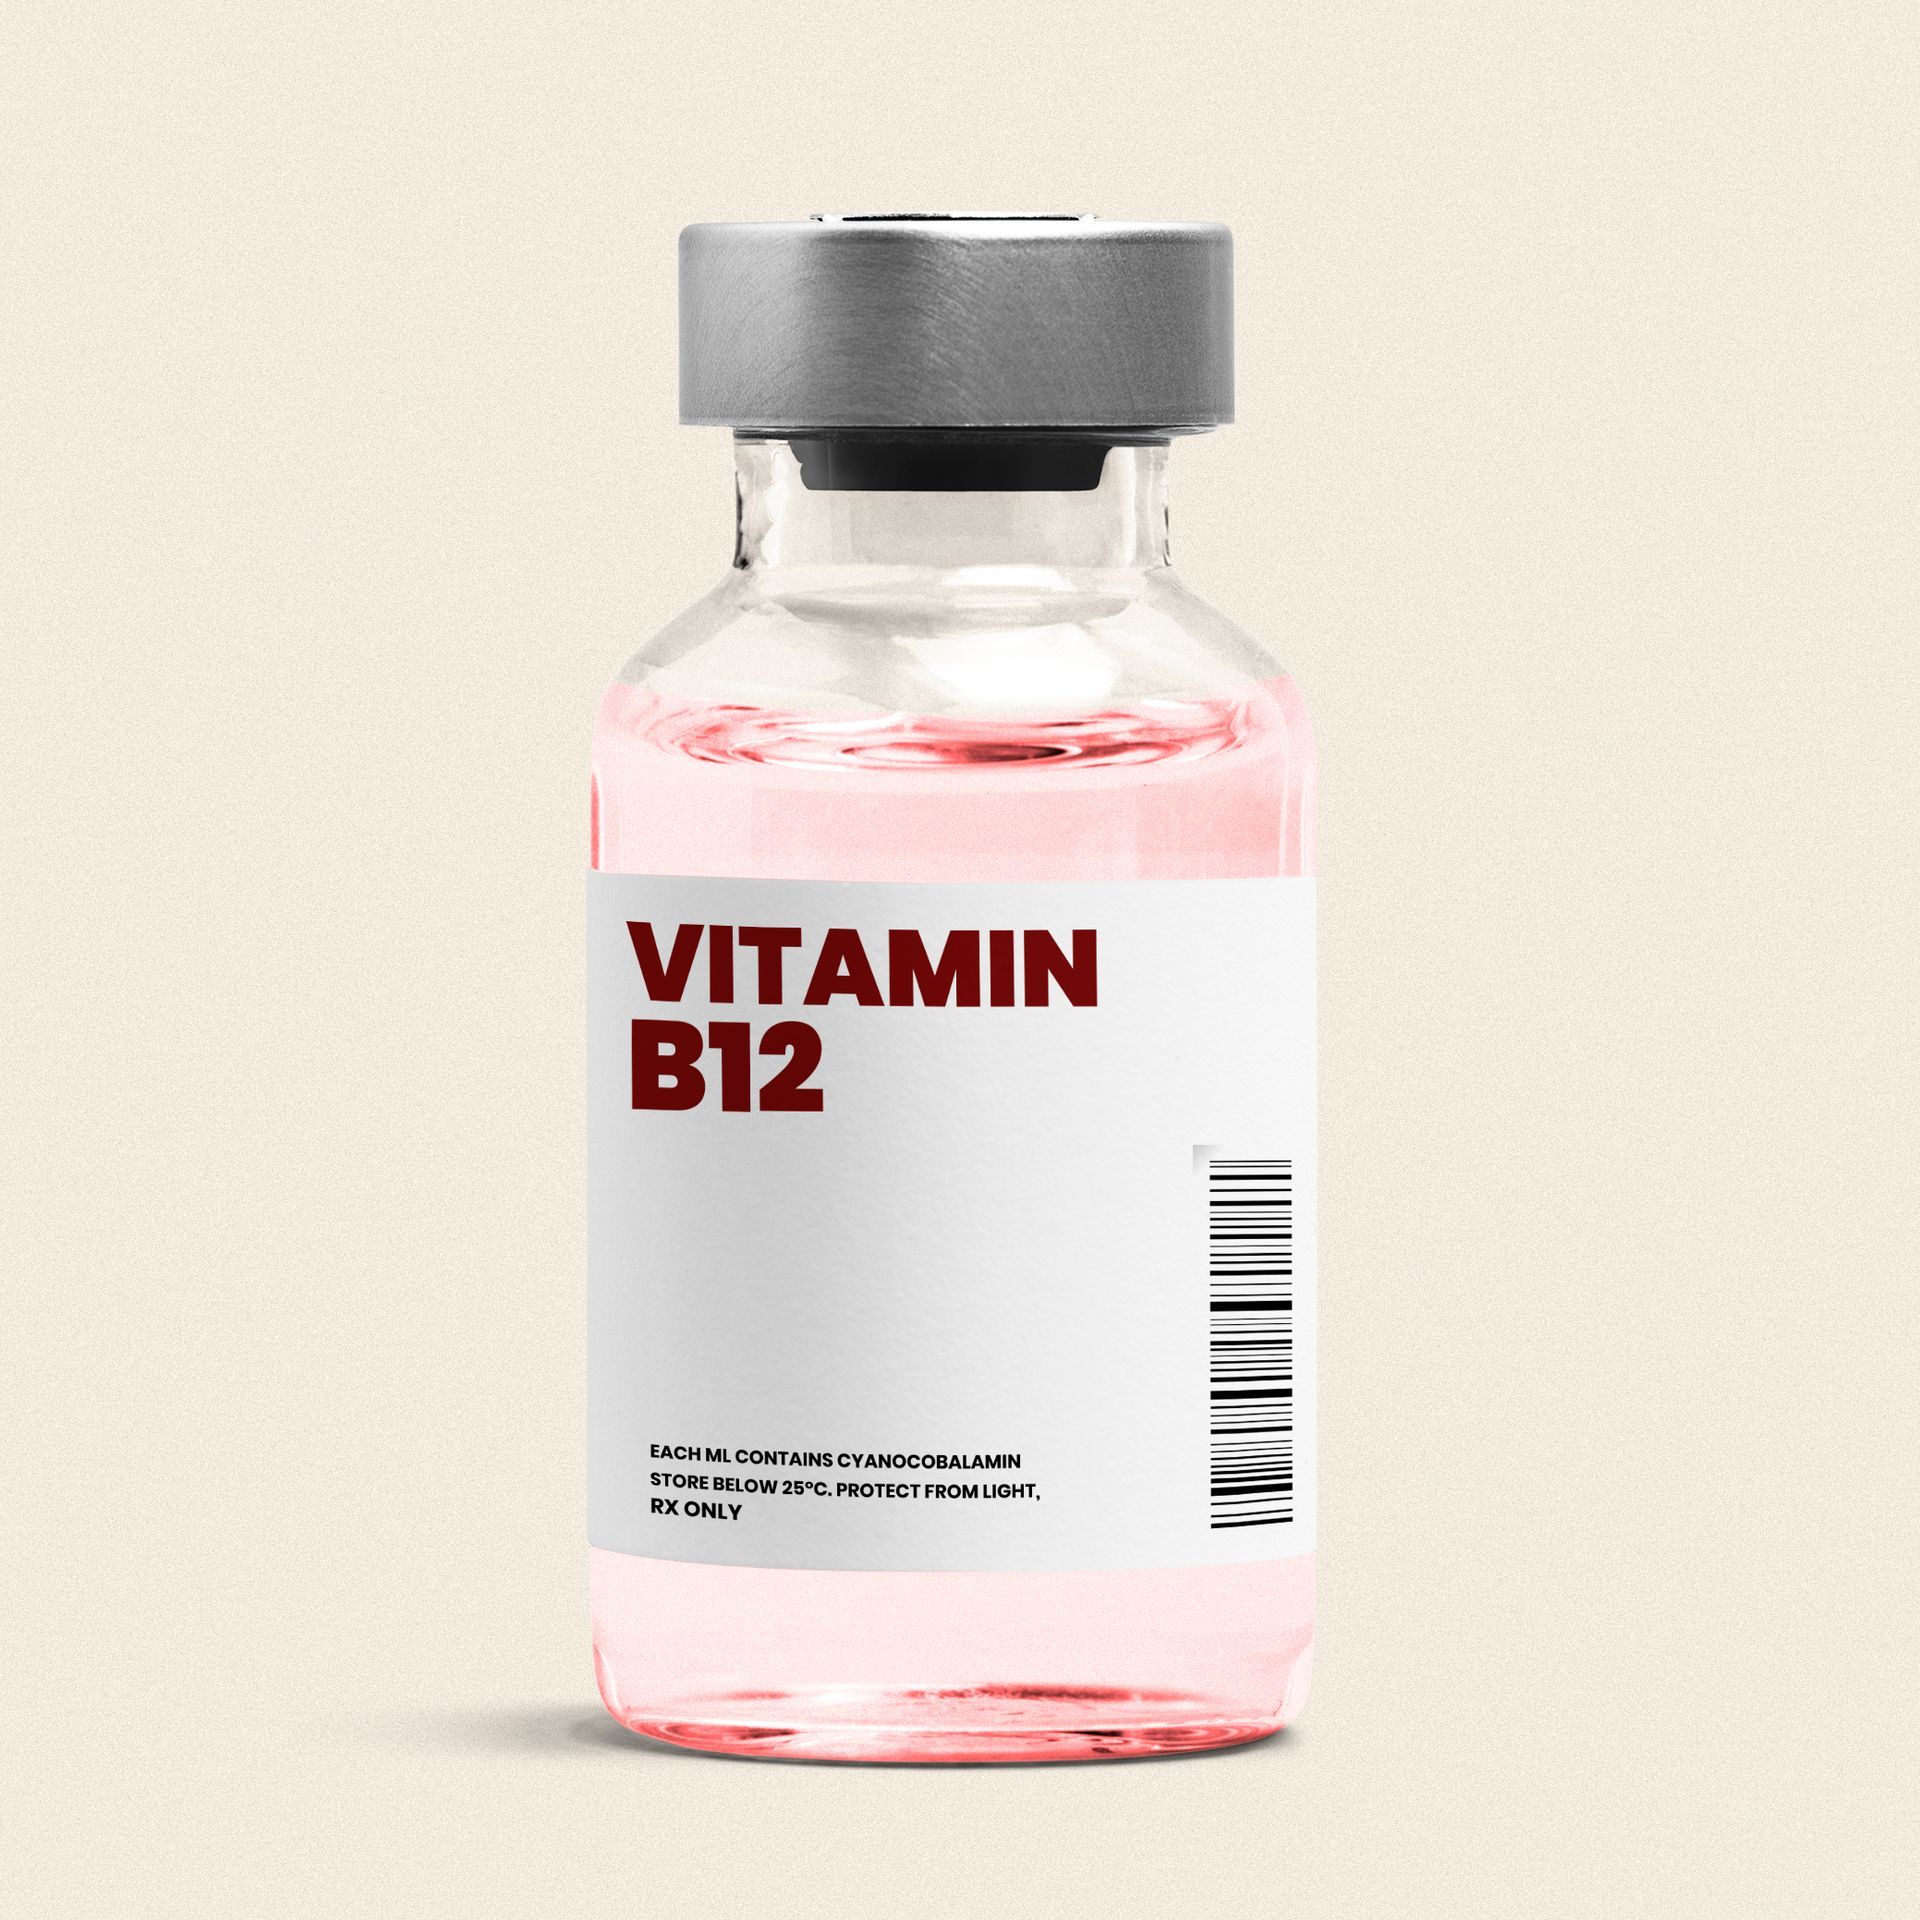 A bottle of vitamin b12 is sitting on a table.